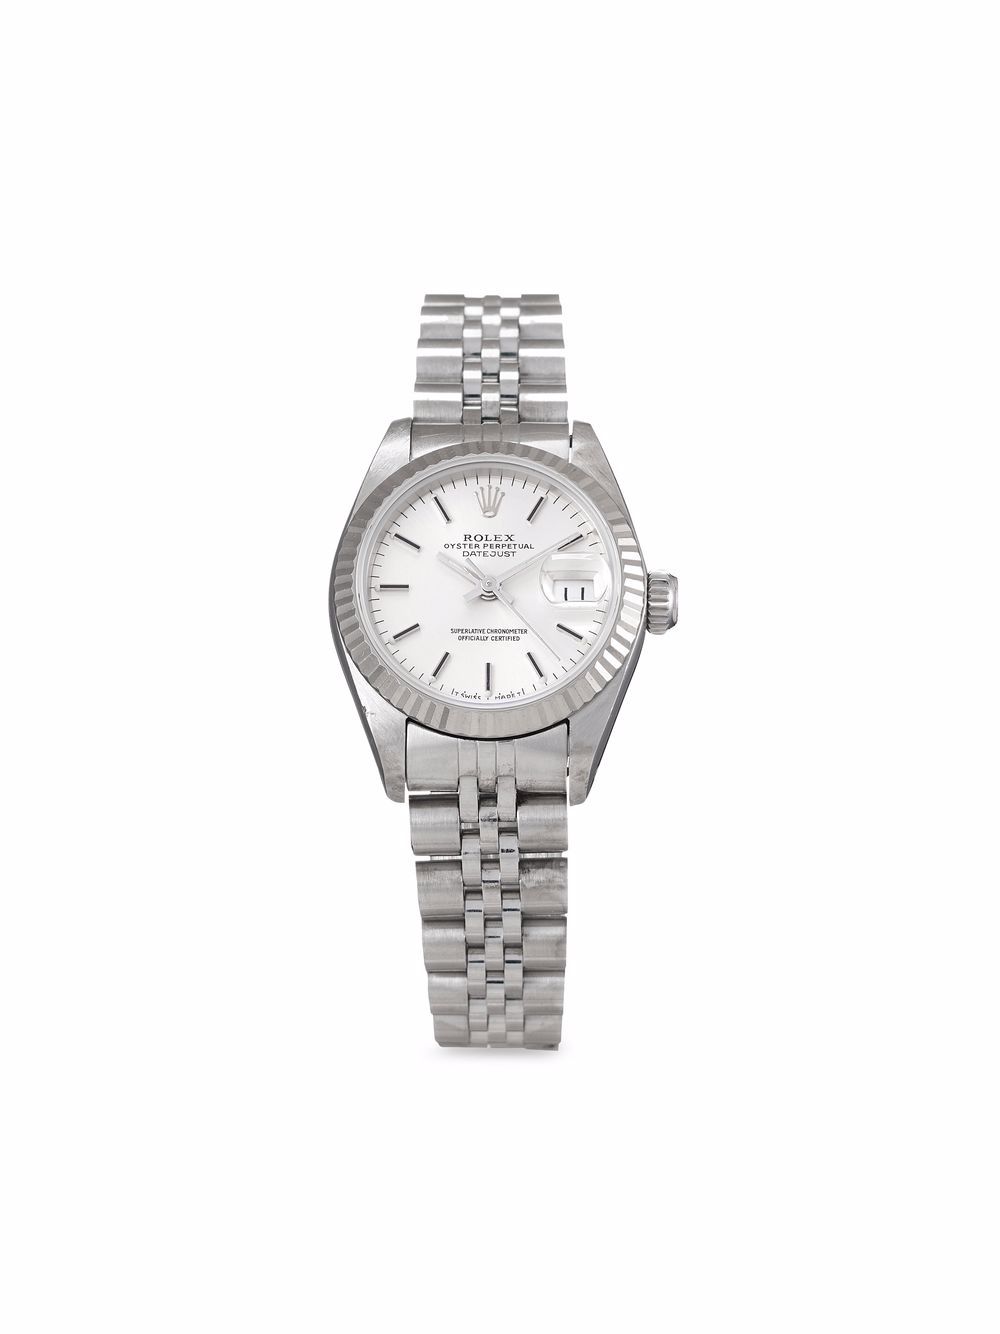 1987 pre-owned Lady-Datejust 26mm